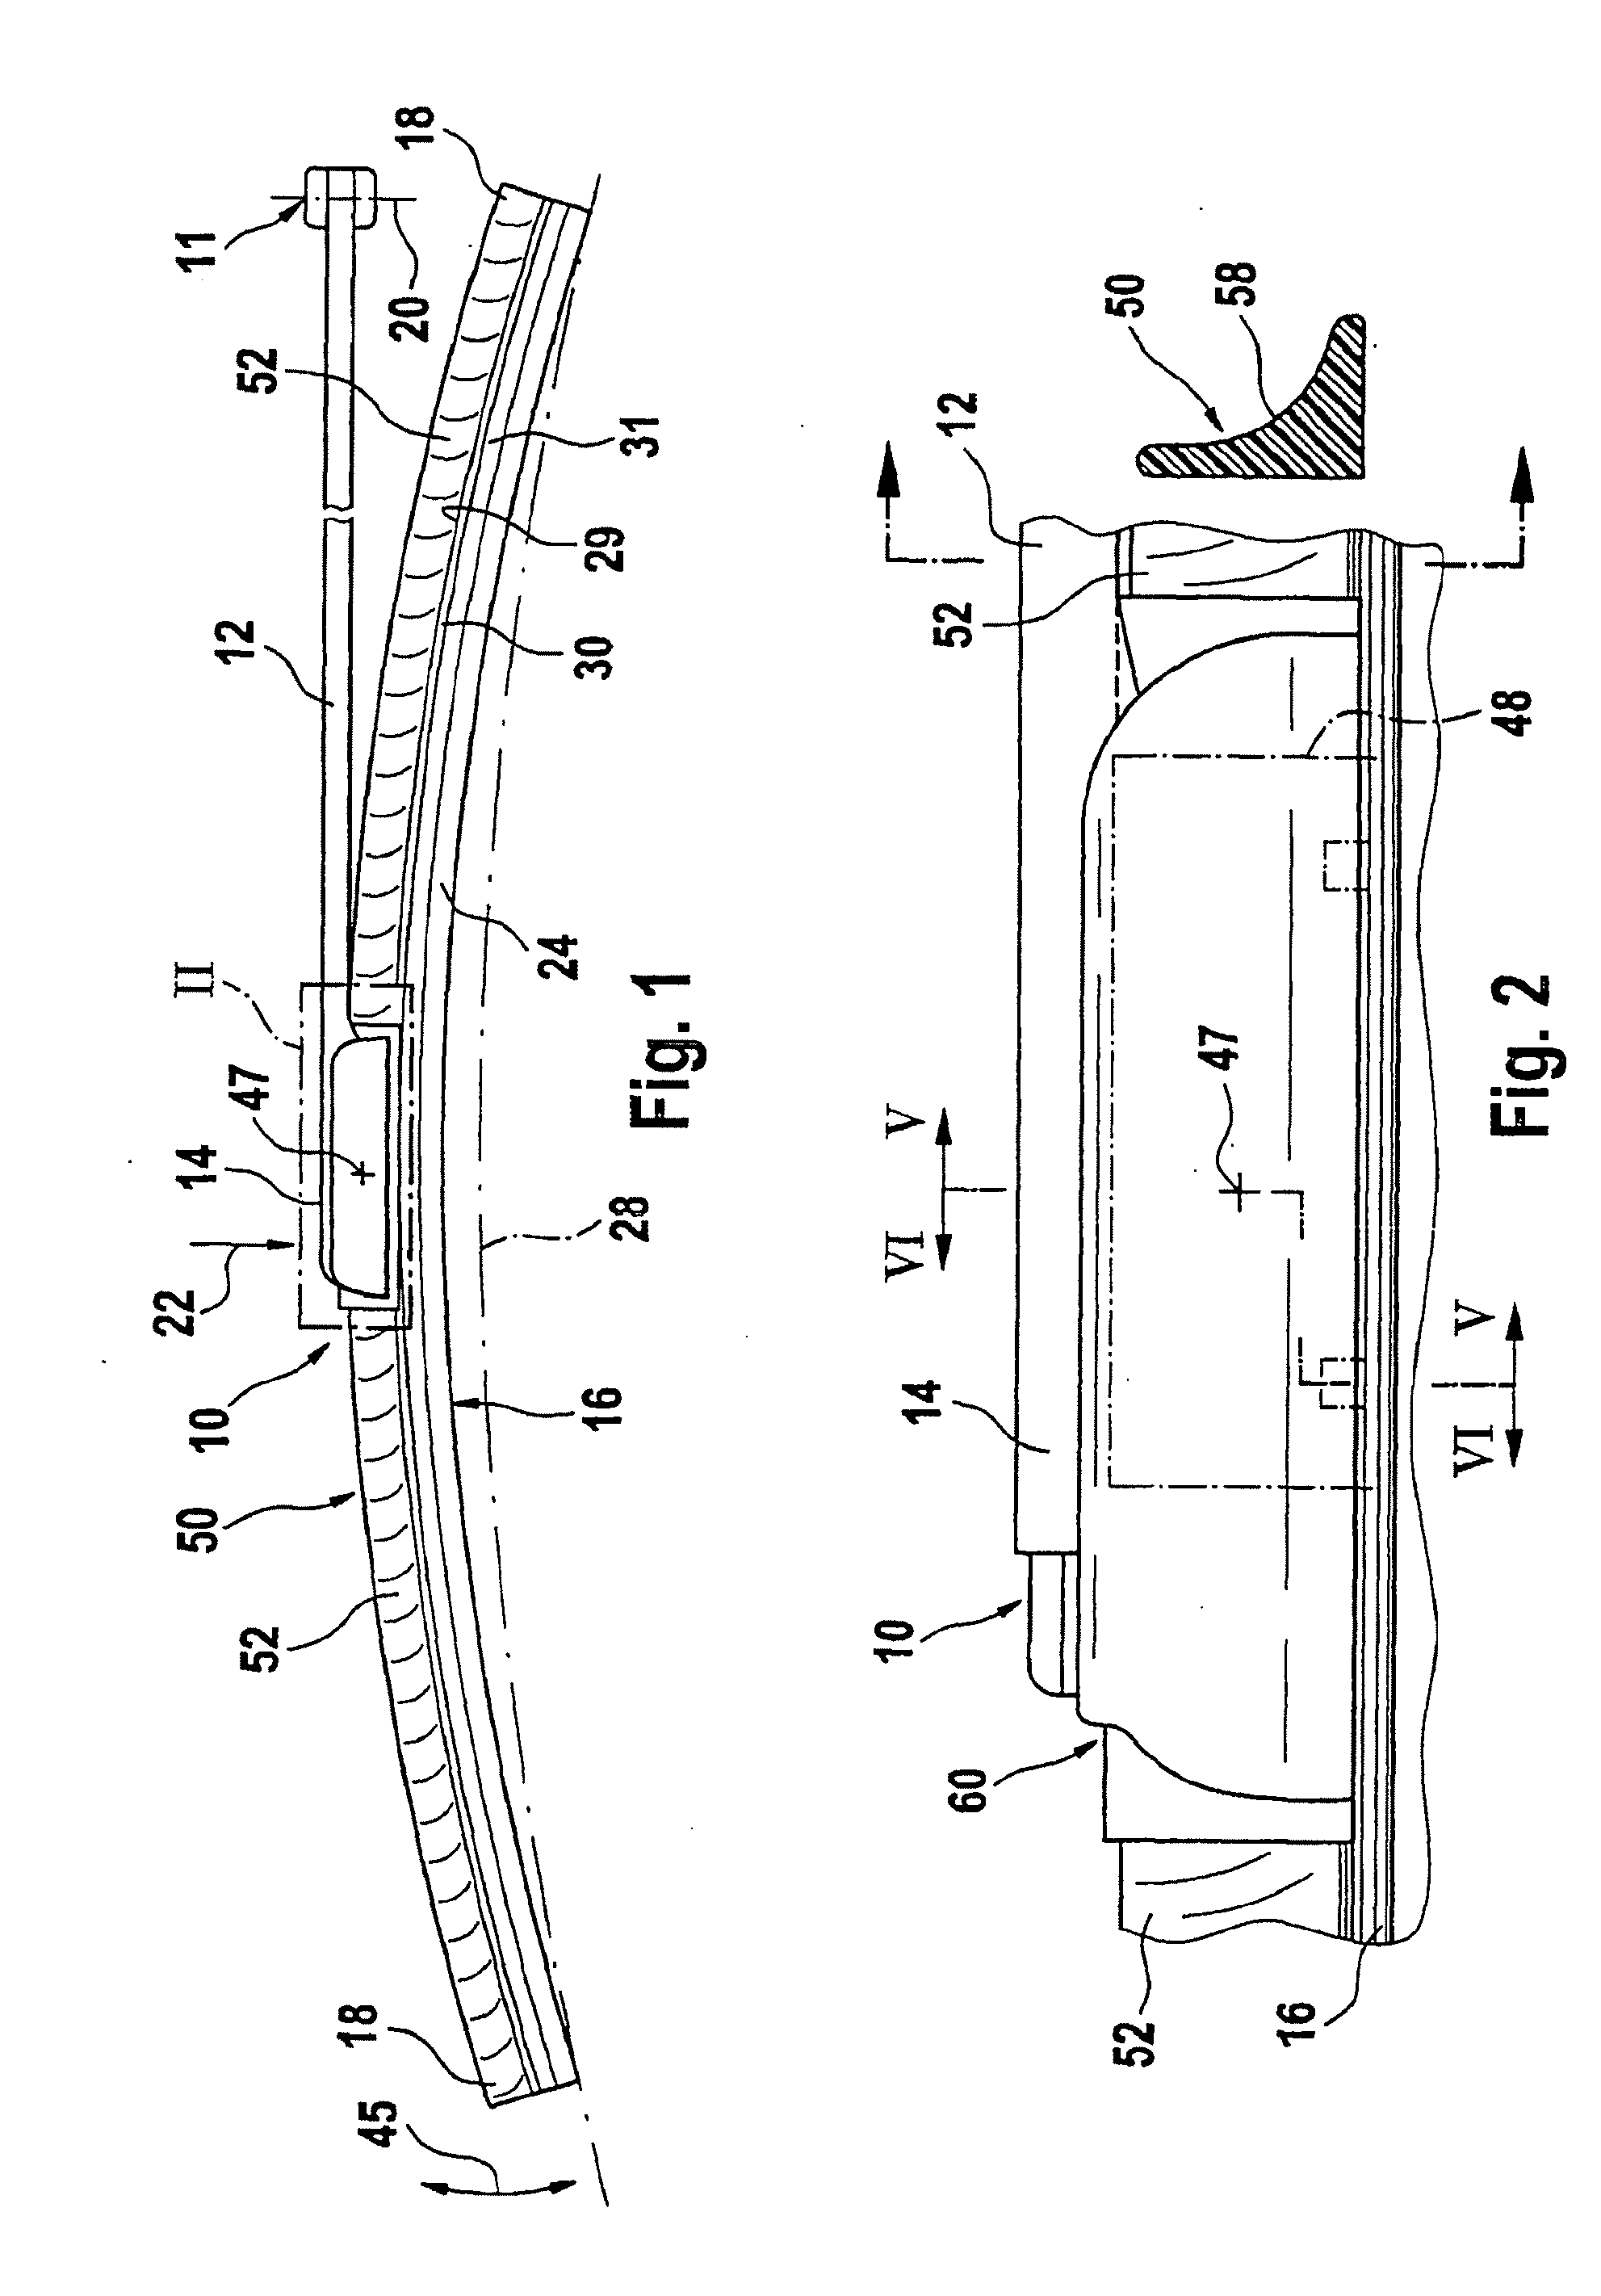 Wiper lever with a driven wiper arm and a wiper blade